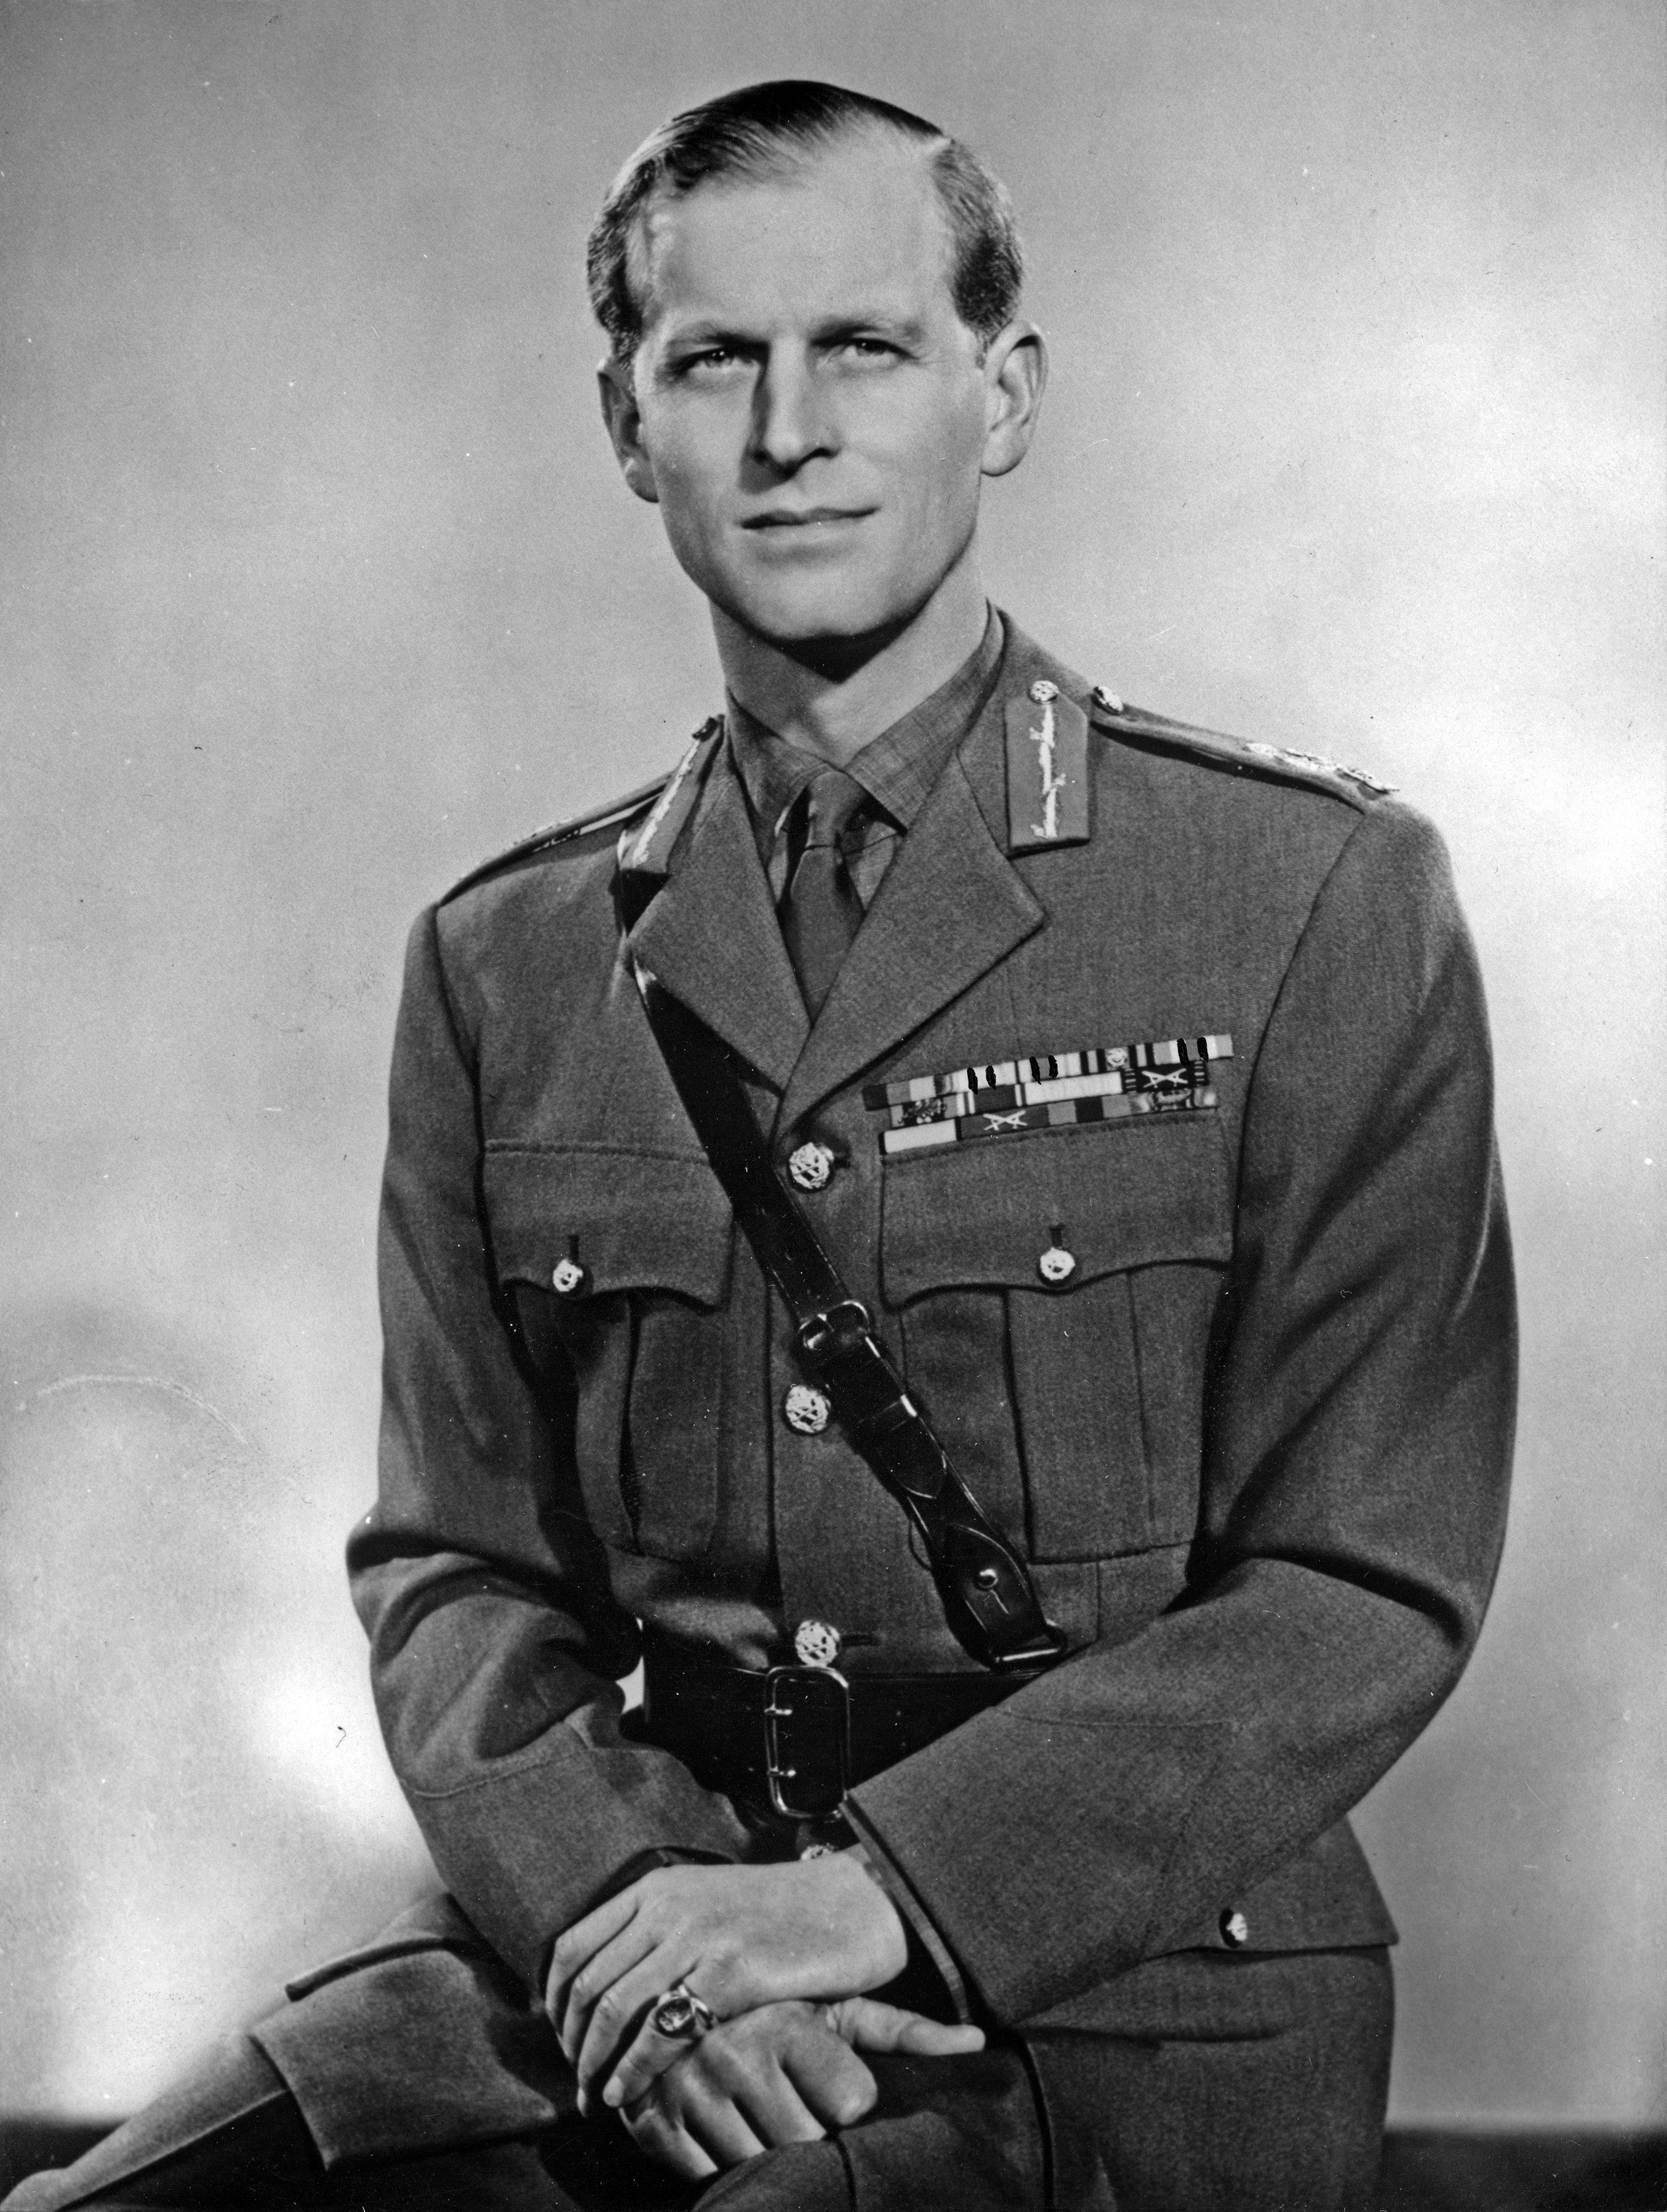 The Duke of Edinburgh in his Field Marshall uniform for the British Army | Photo: Getty Images